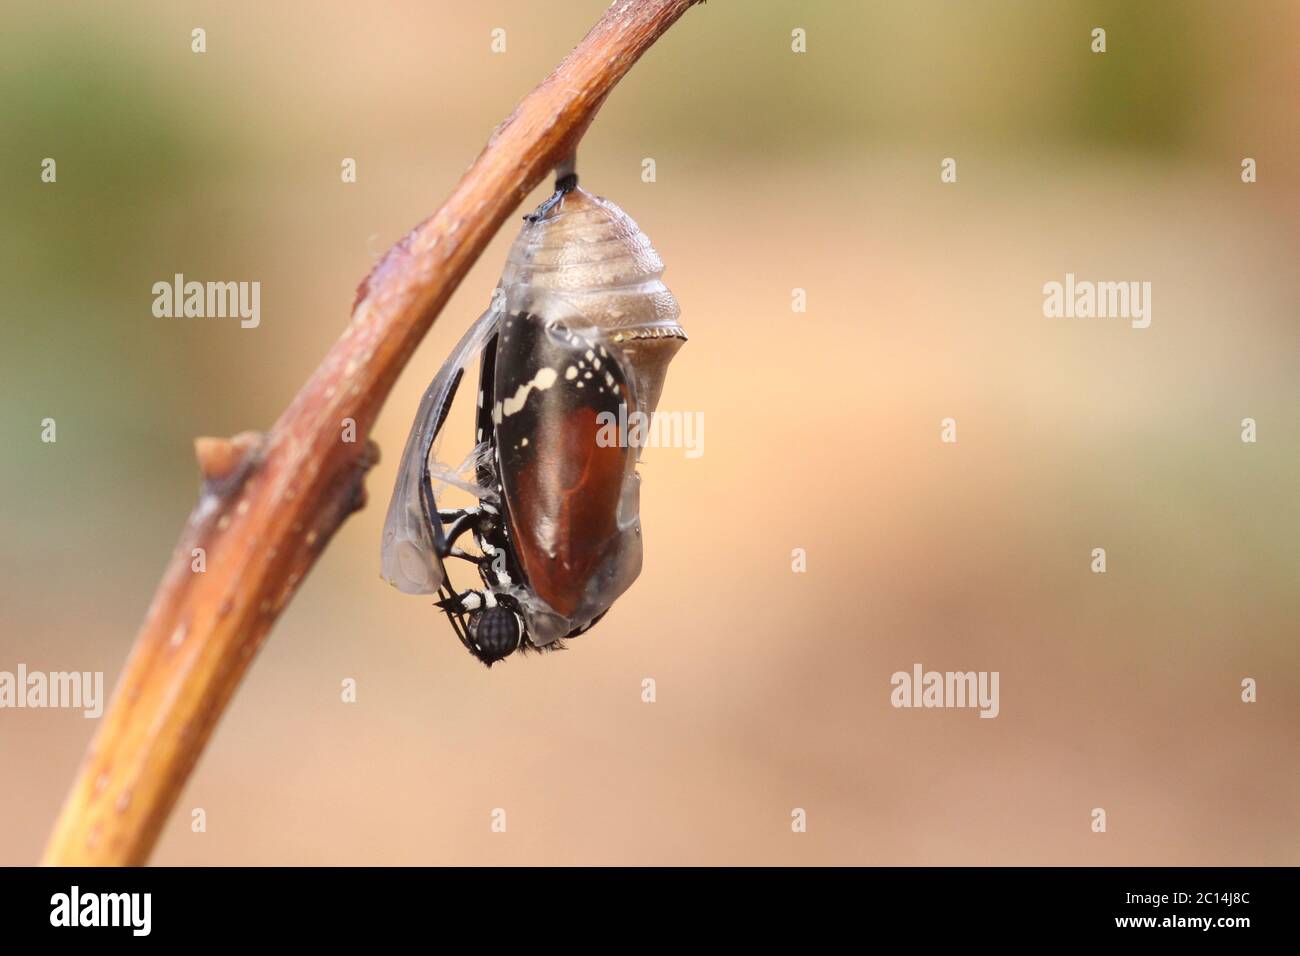 butterfly (Danaus chrysippus), or common tiger butterfly emerging from its cocoon (centre). This butterfly is found in Africa, India, south-eastern As Stock Photo